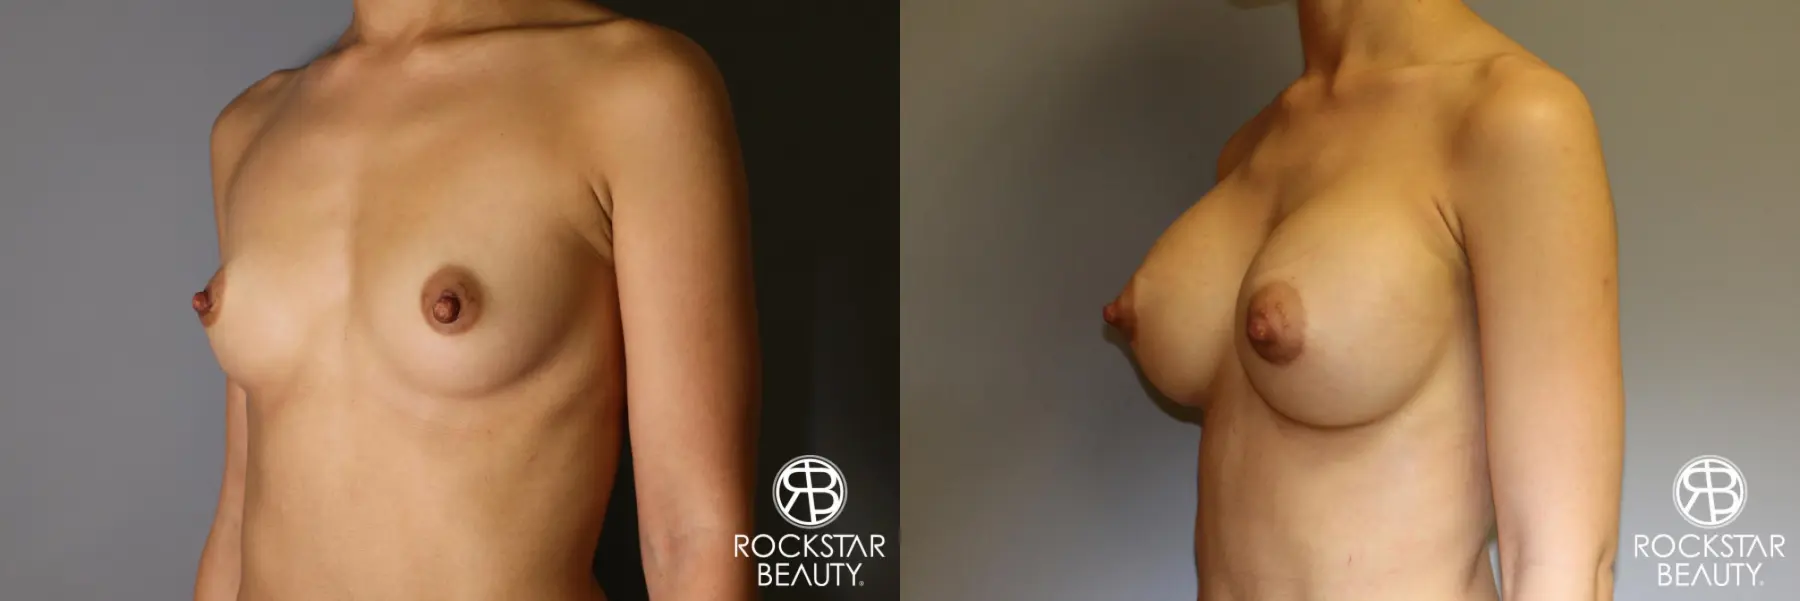 Breast Augmentation: Patient 17 - Before and After 2